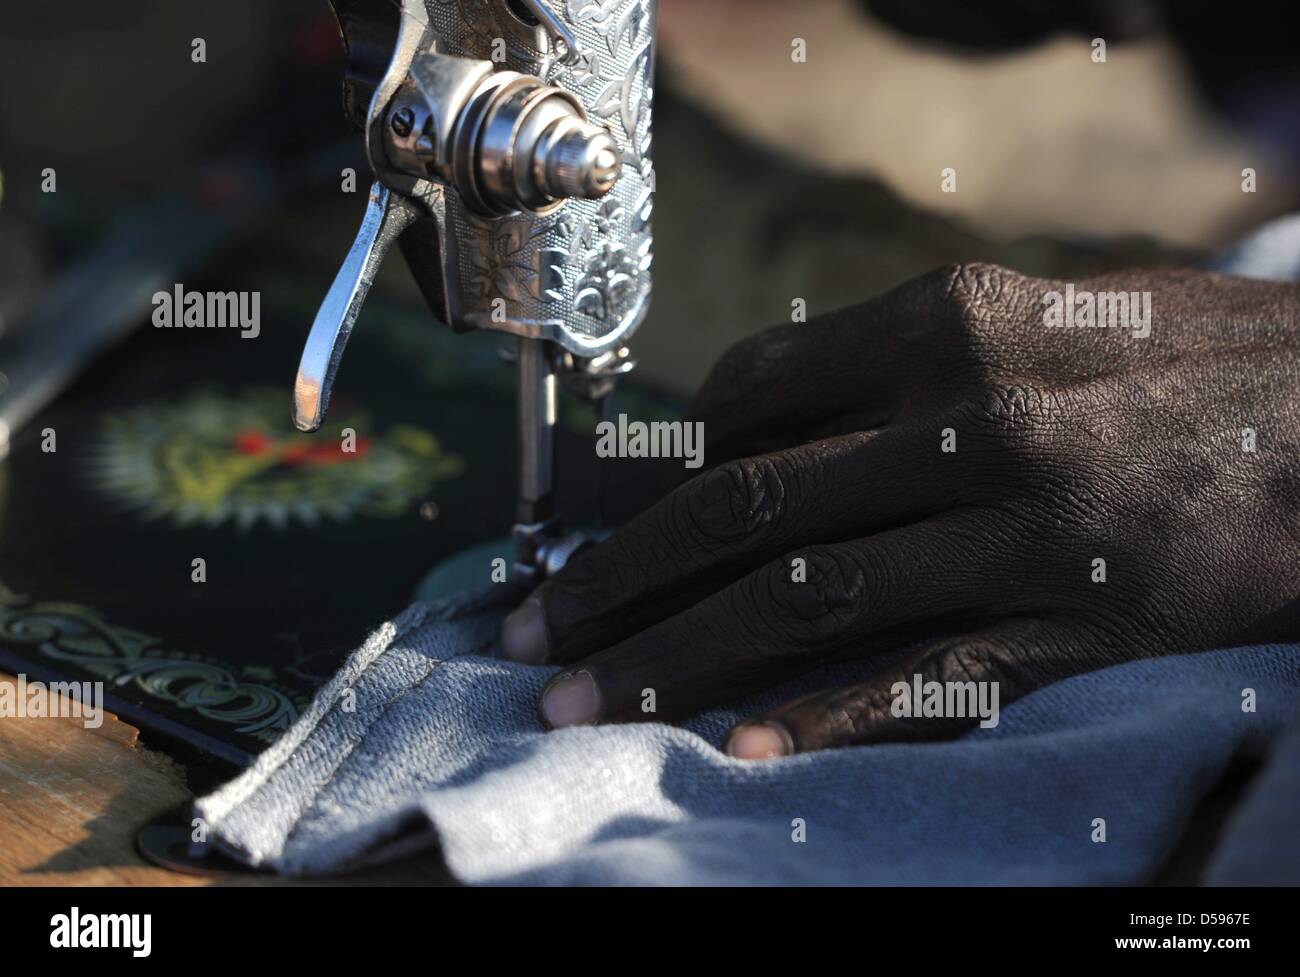 A man uses a sewing machine in the Atteridgeville Township, near Pretoria, South Africa 12 June 2010. South Africa hosts the 2010 FIFA World Cup from 11 June - 11 July for the first time on African soil. Photo: Marcus Brandt dpa Stock Photo